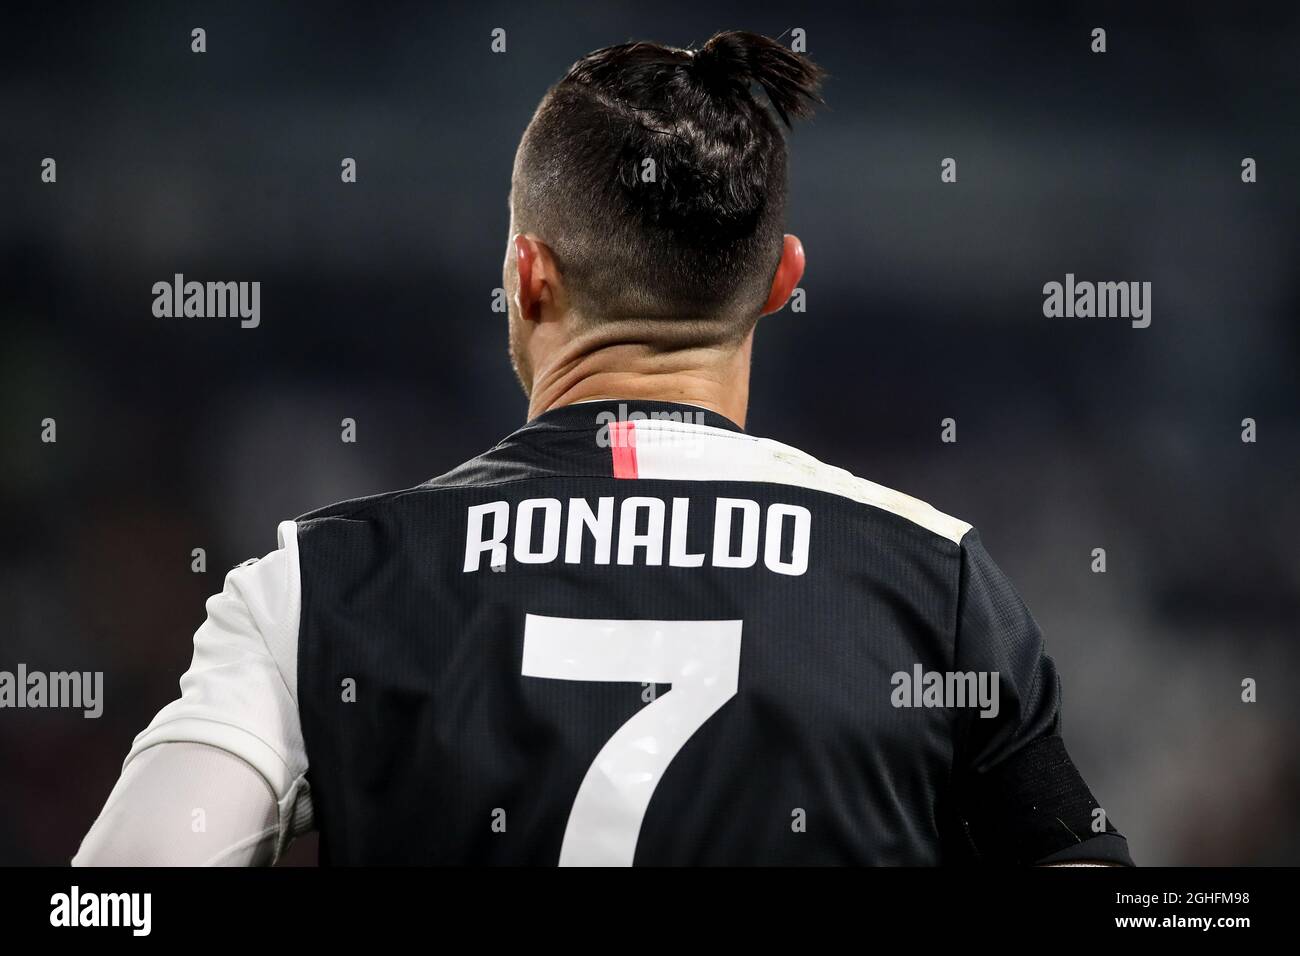 The Best Cristiano Ronaldo Haircuts and Hairstyles updated 2021